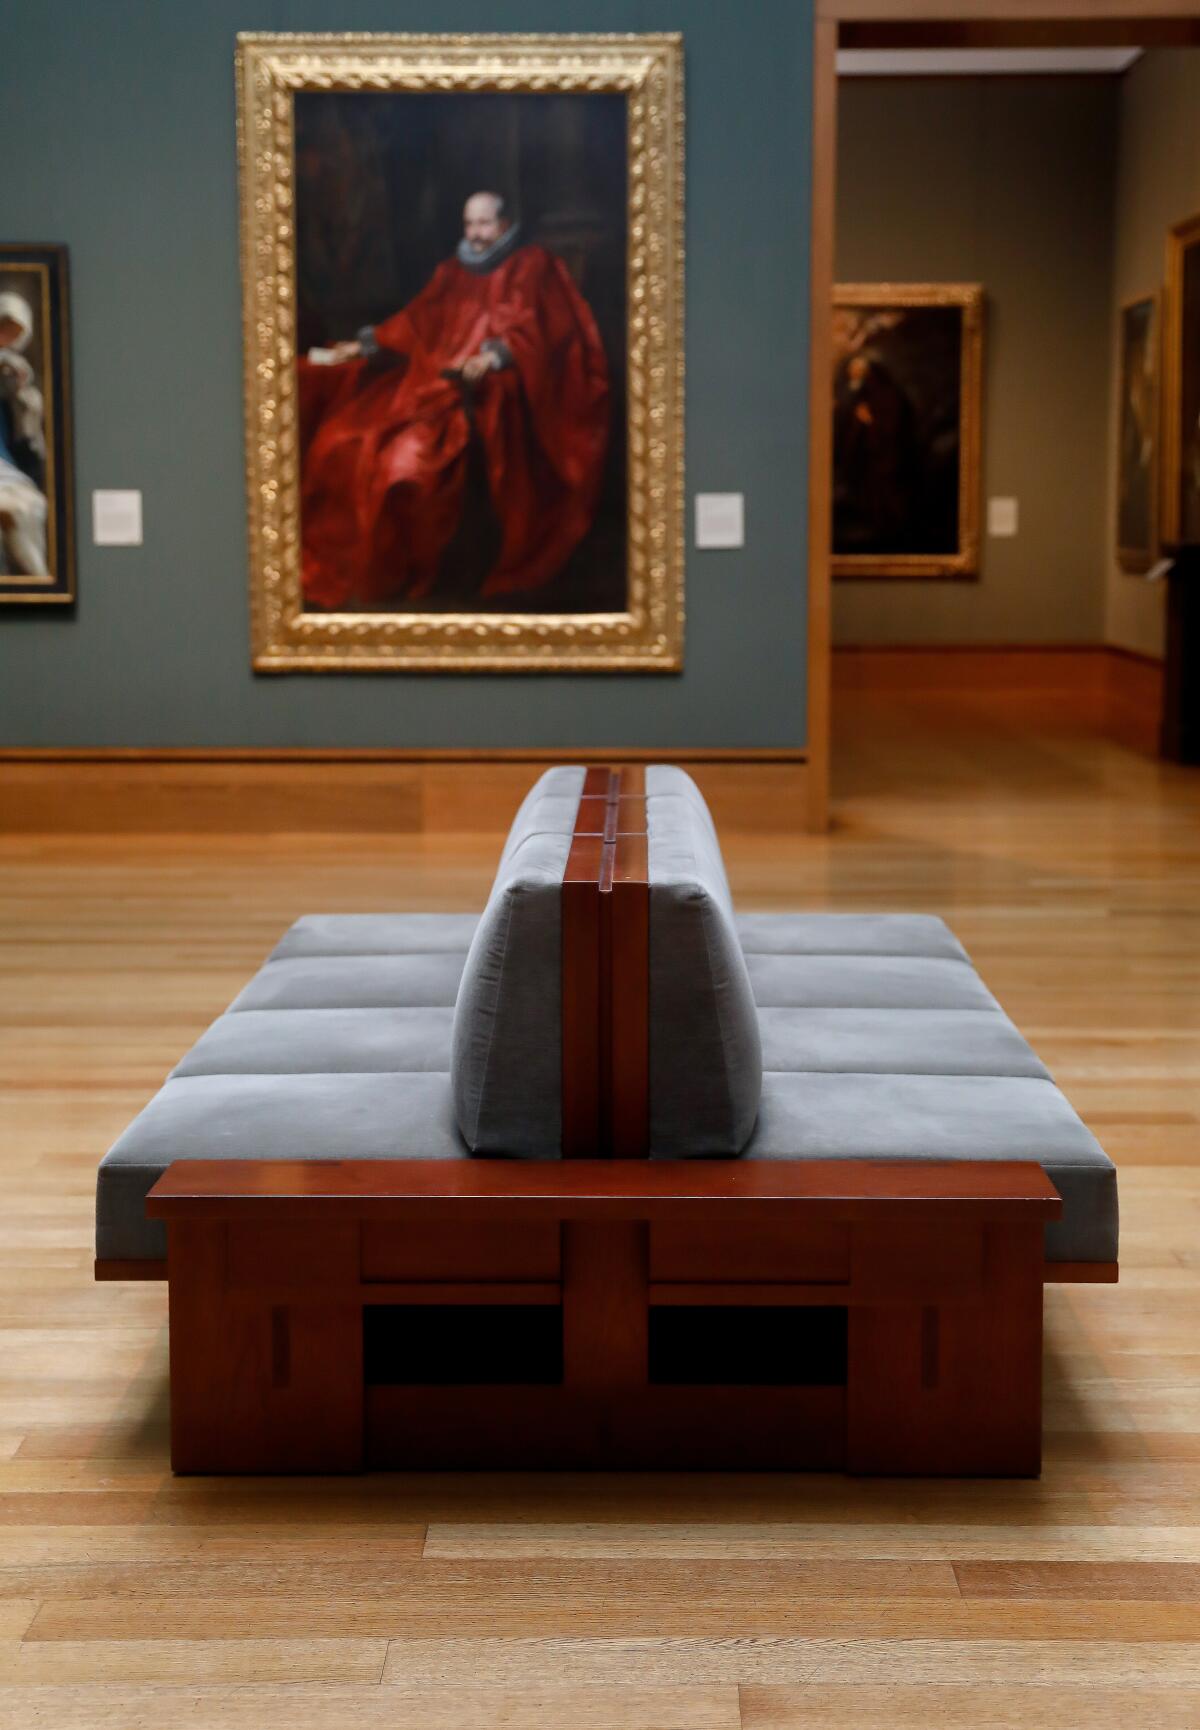 A bench with a hard back and velvety cushions in a gallery with green walls and a portrait of a man in red.